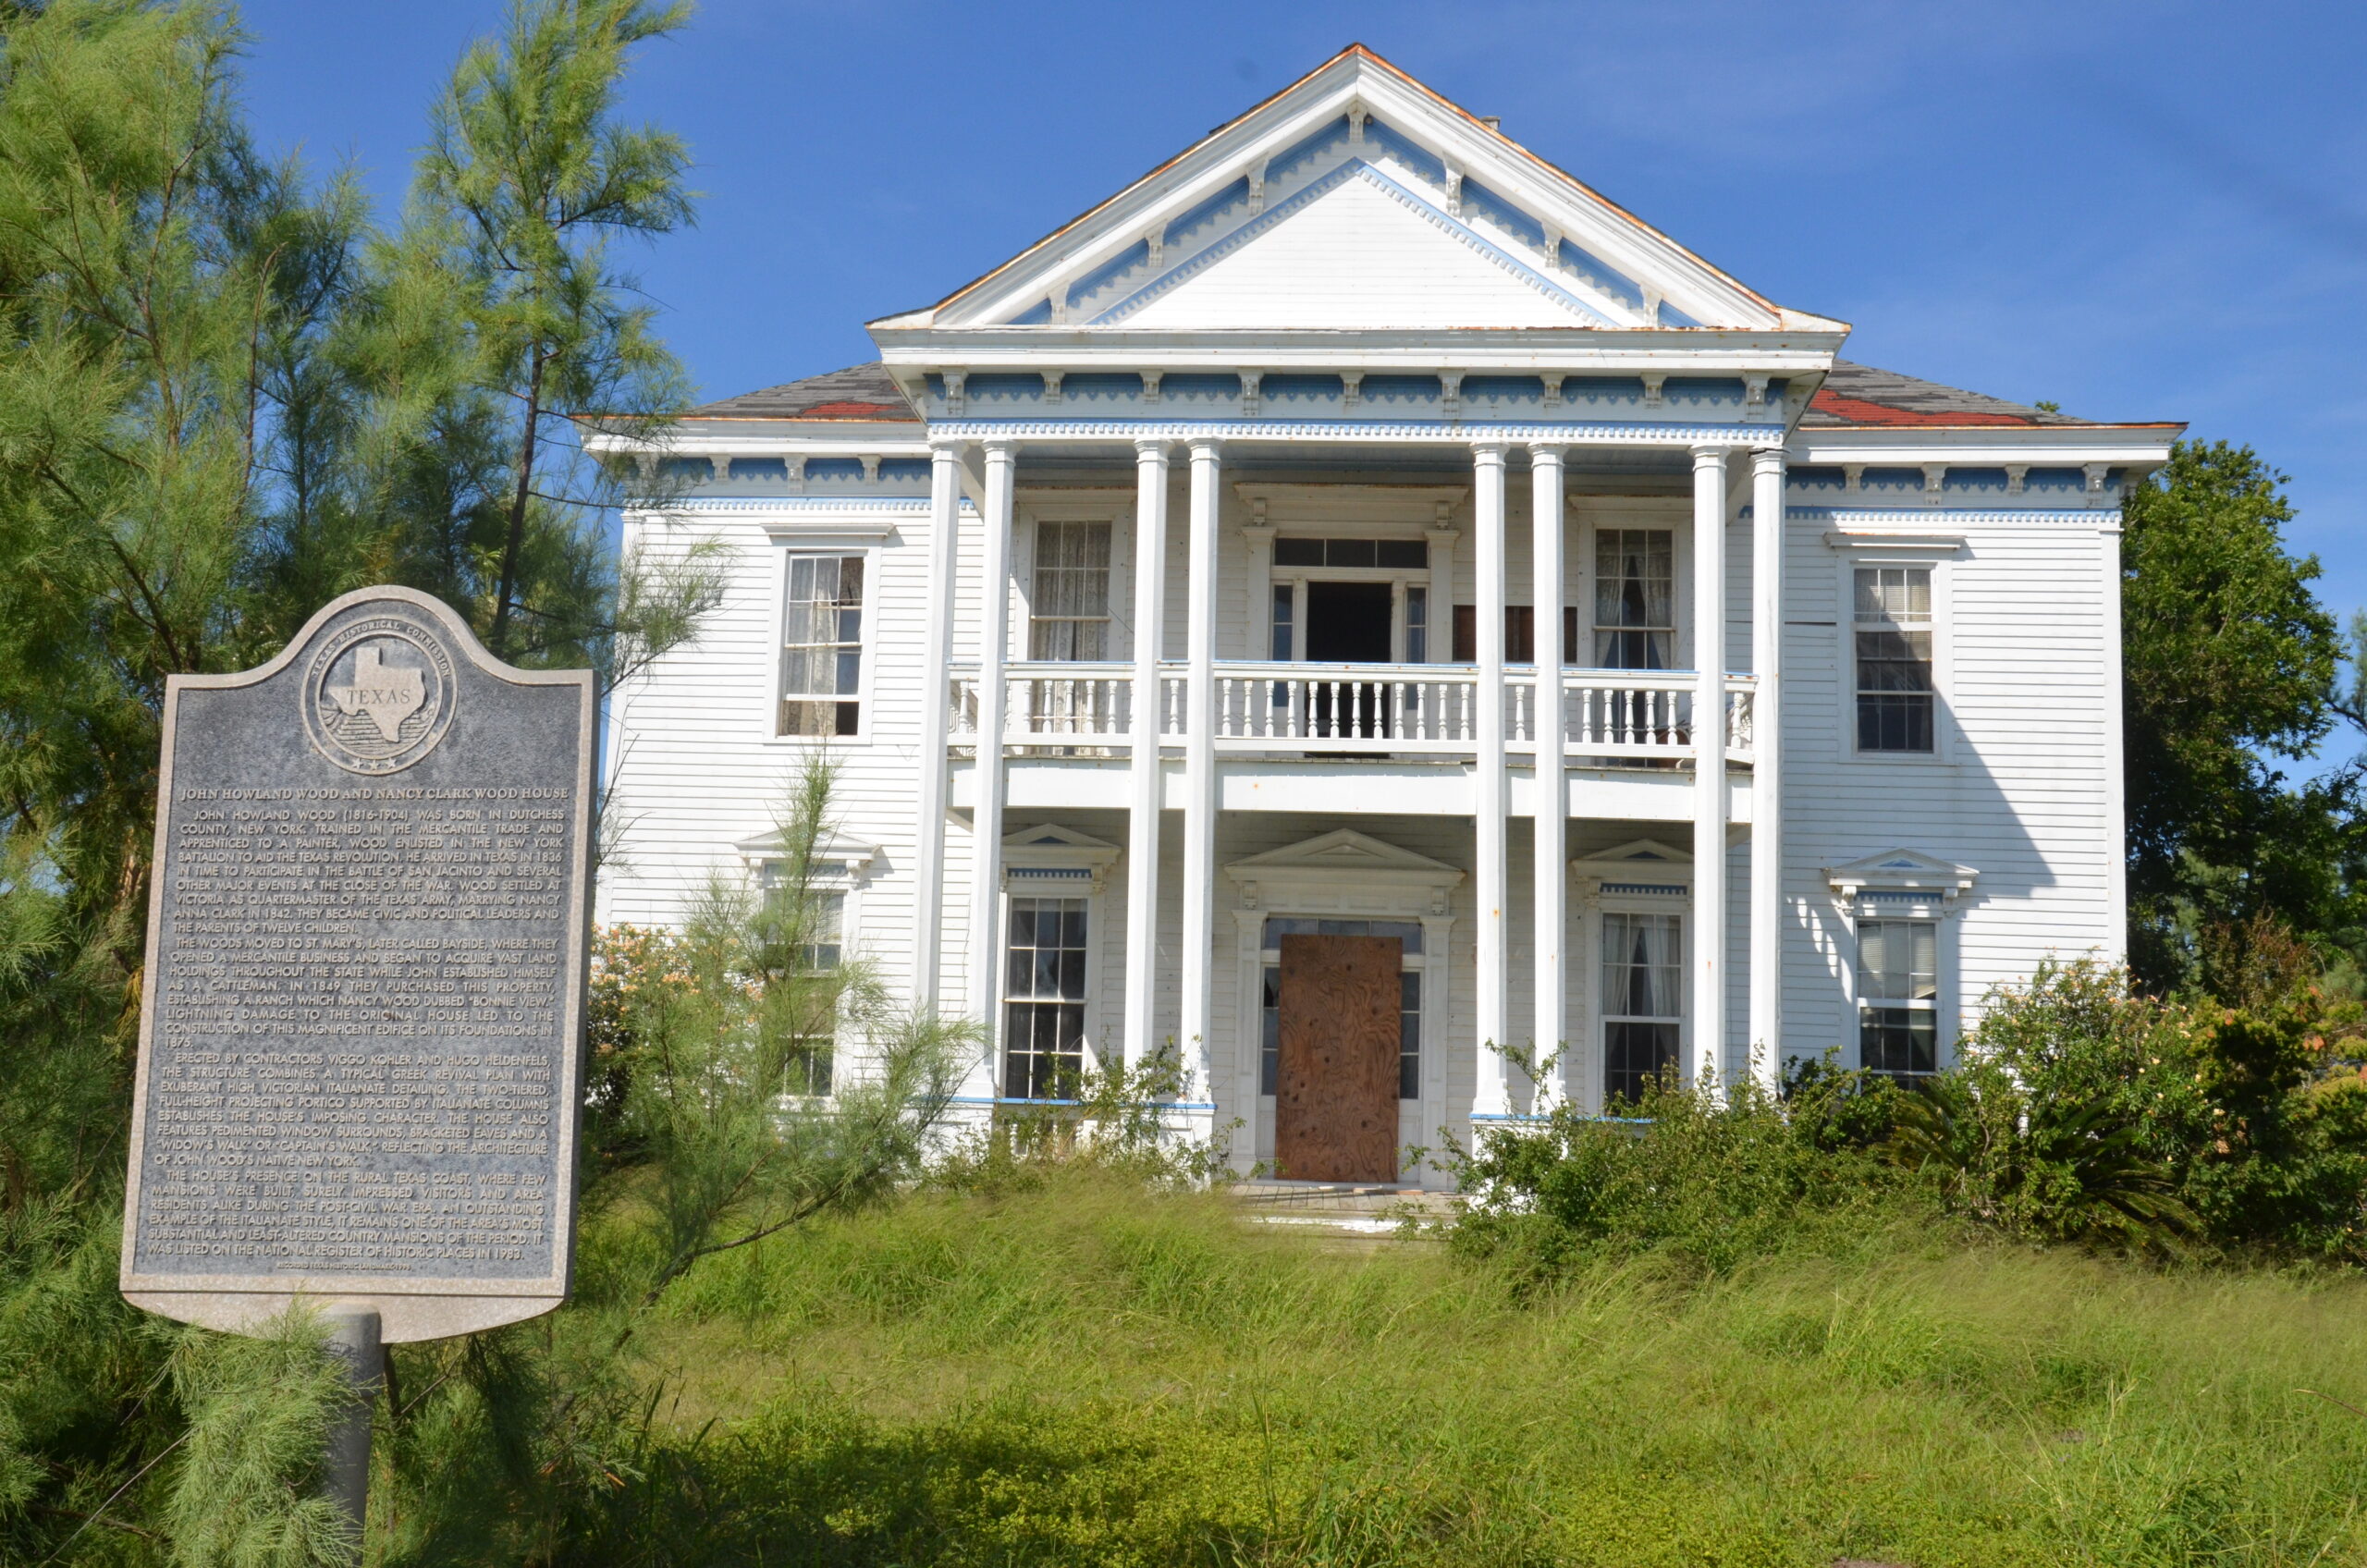 The 1875 Wood Mansion and its accompanying historical marker